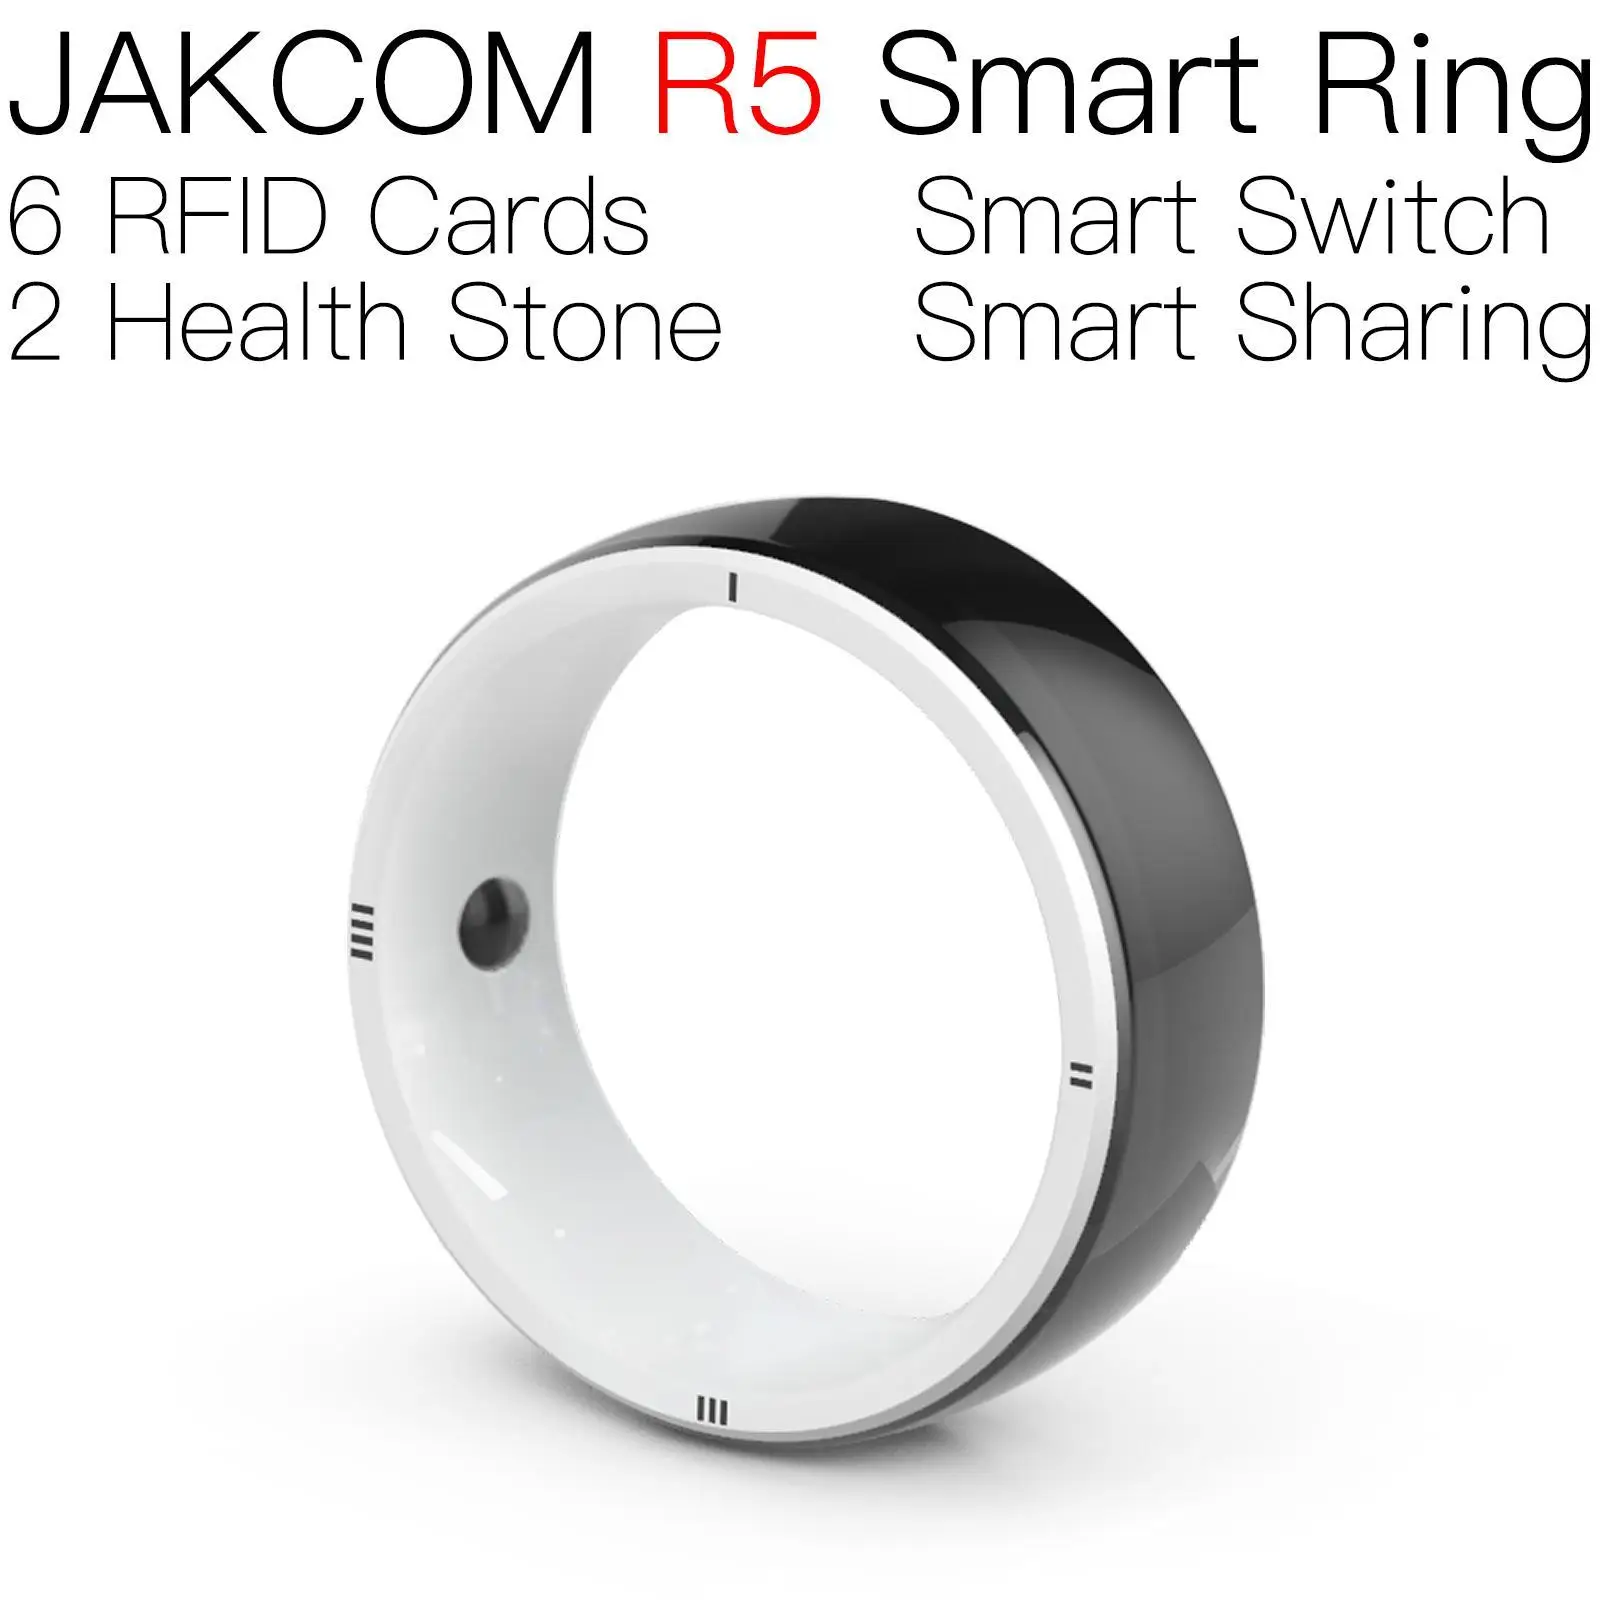 

JAKCOM R5 Smart Ring Match to iteractive rfid tags 125khz rewritable em 4305 nfc tag round 25mm rf holder iso15693 chip sticker